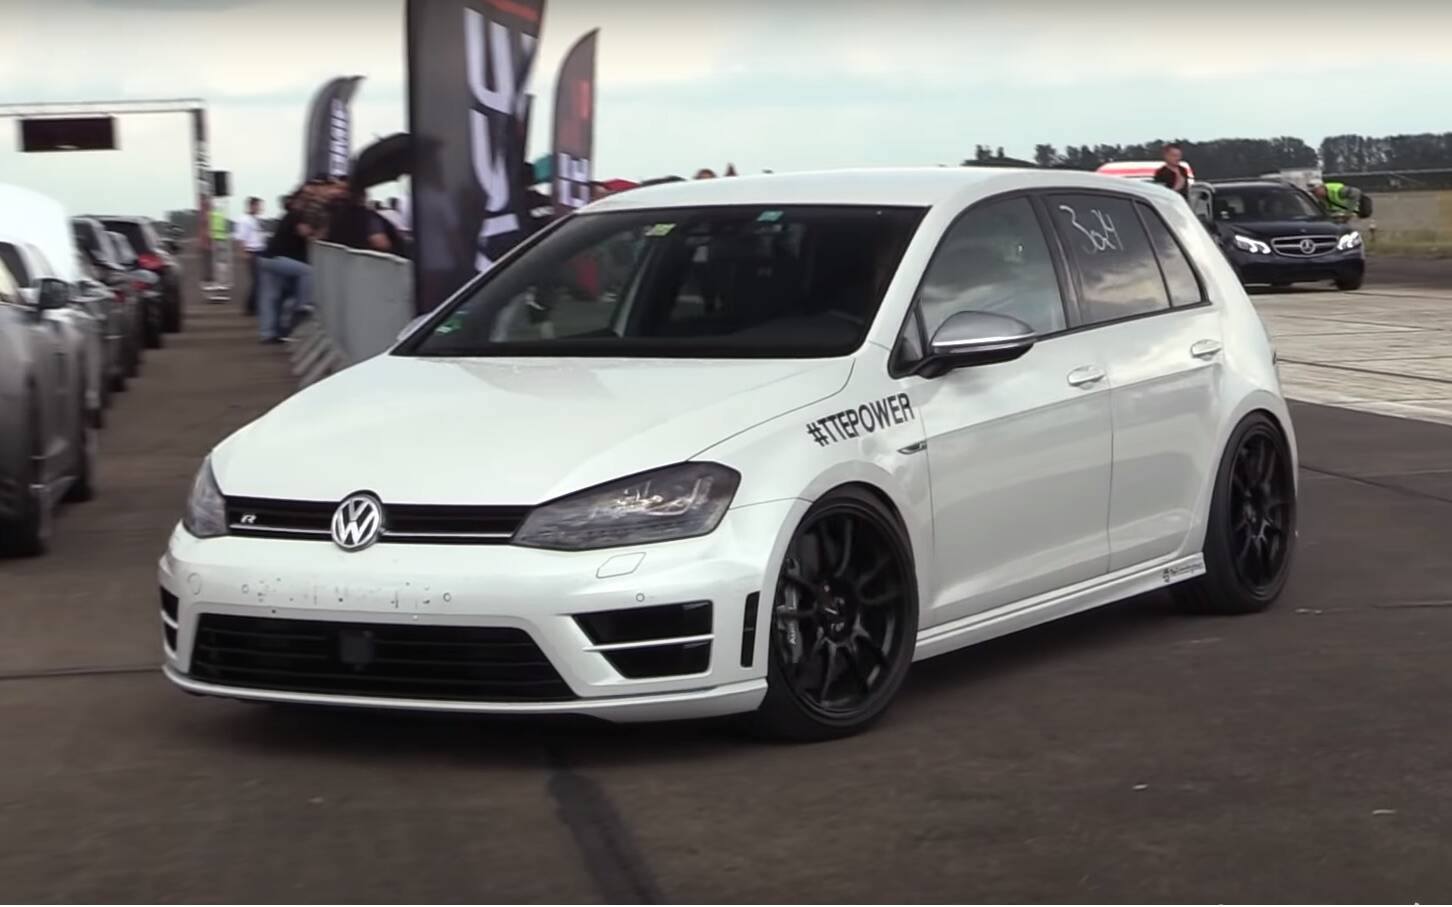 How Much Hp Can a Mk7 Gti Handle?